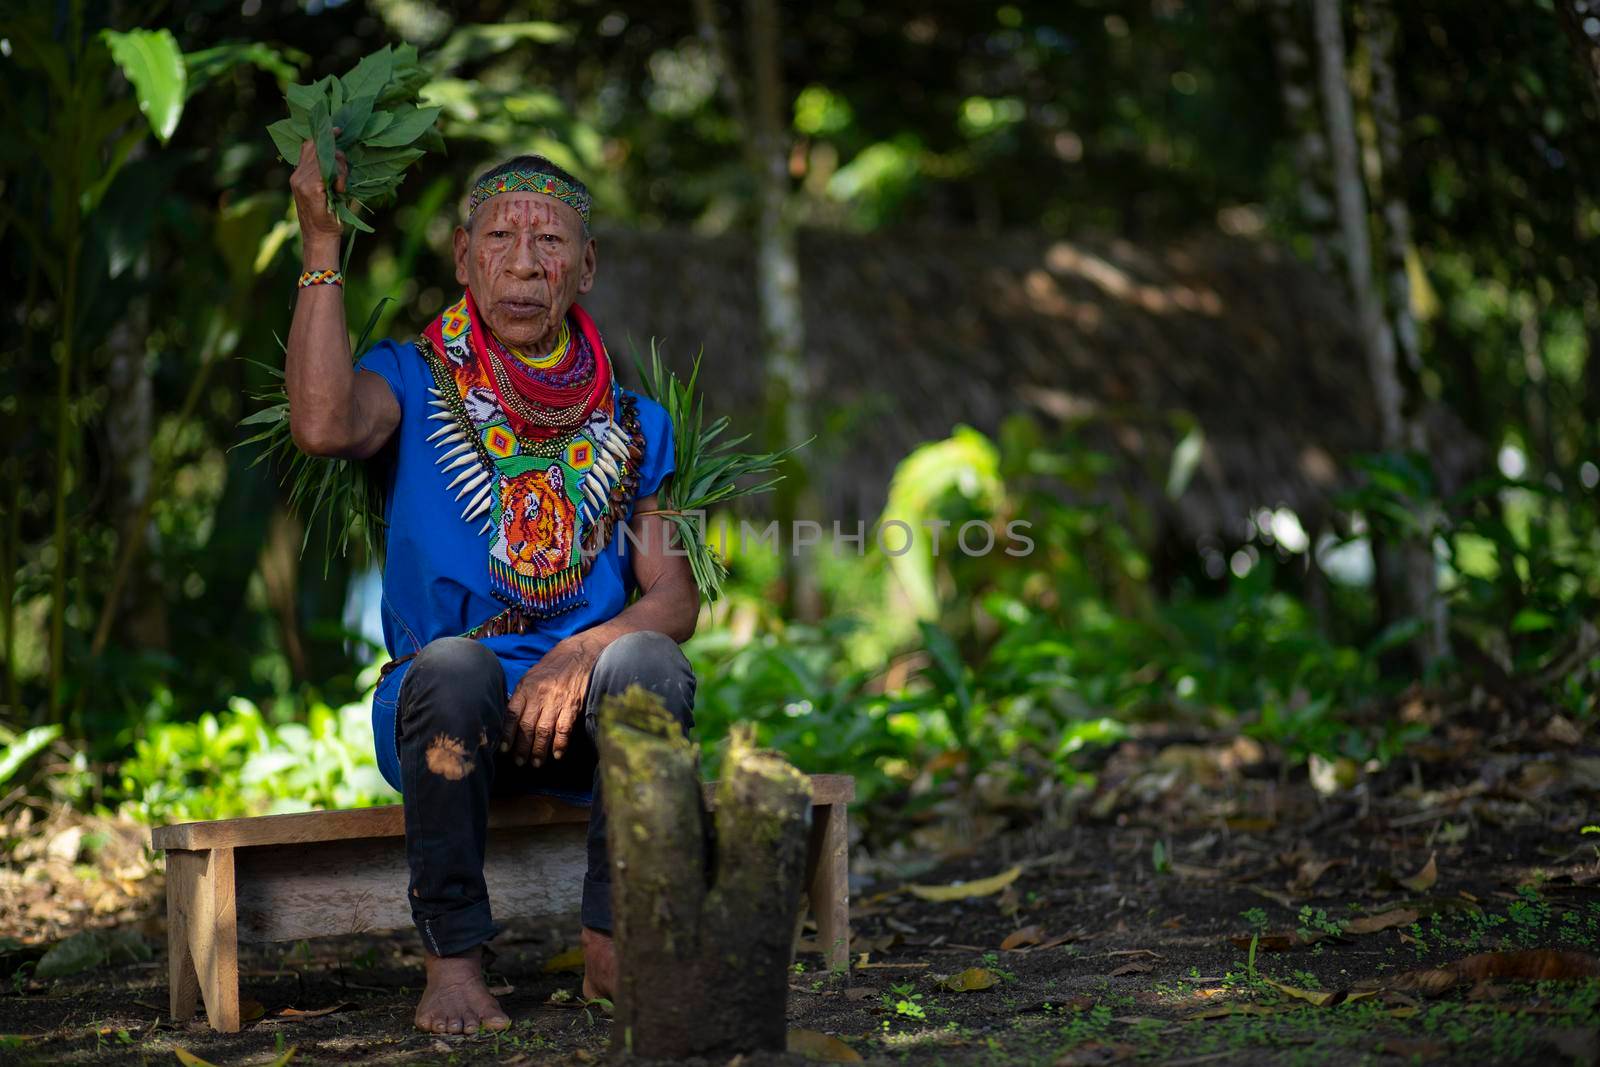 Nueva Loja, Sucumbios / Ecuador - September 2 2020: Old shaman of the Cofan nationality sitting on a small wooden bench performing a healing ritual in the middle of the Amazon jungle